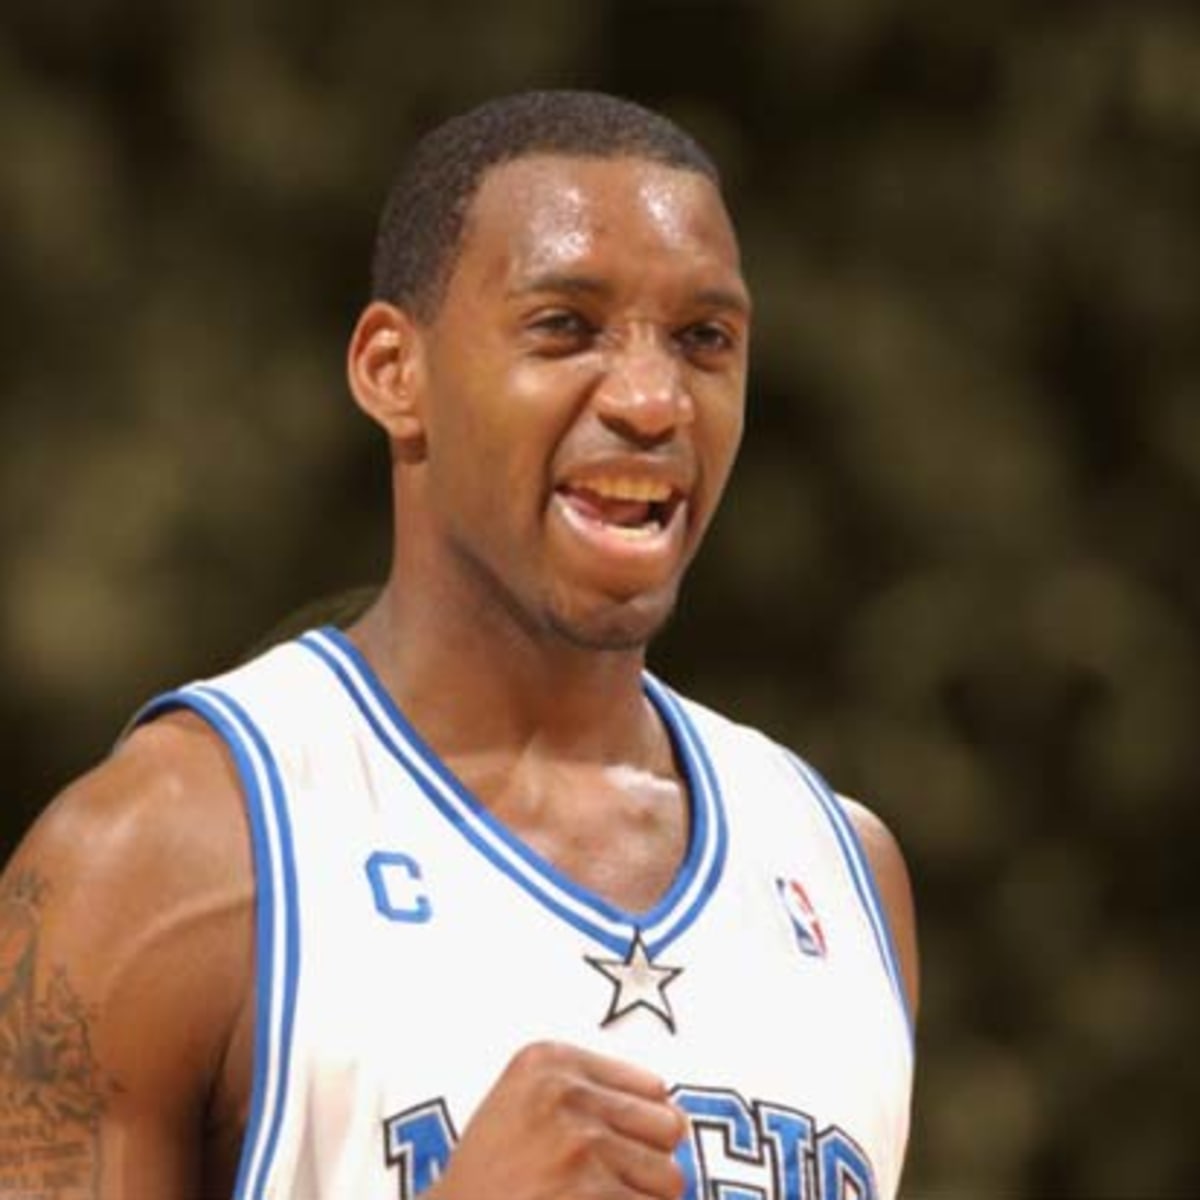 Tracy McGrady: One of the greatest NBA players without a ring - Basketball  Network - Your daily dose of basketball